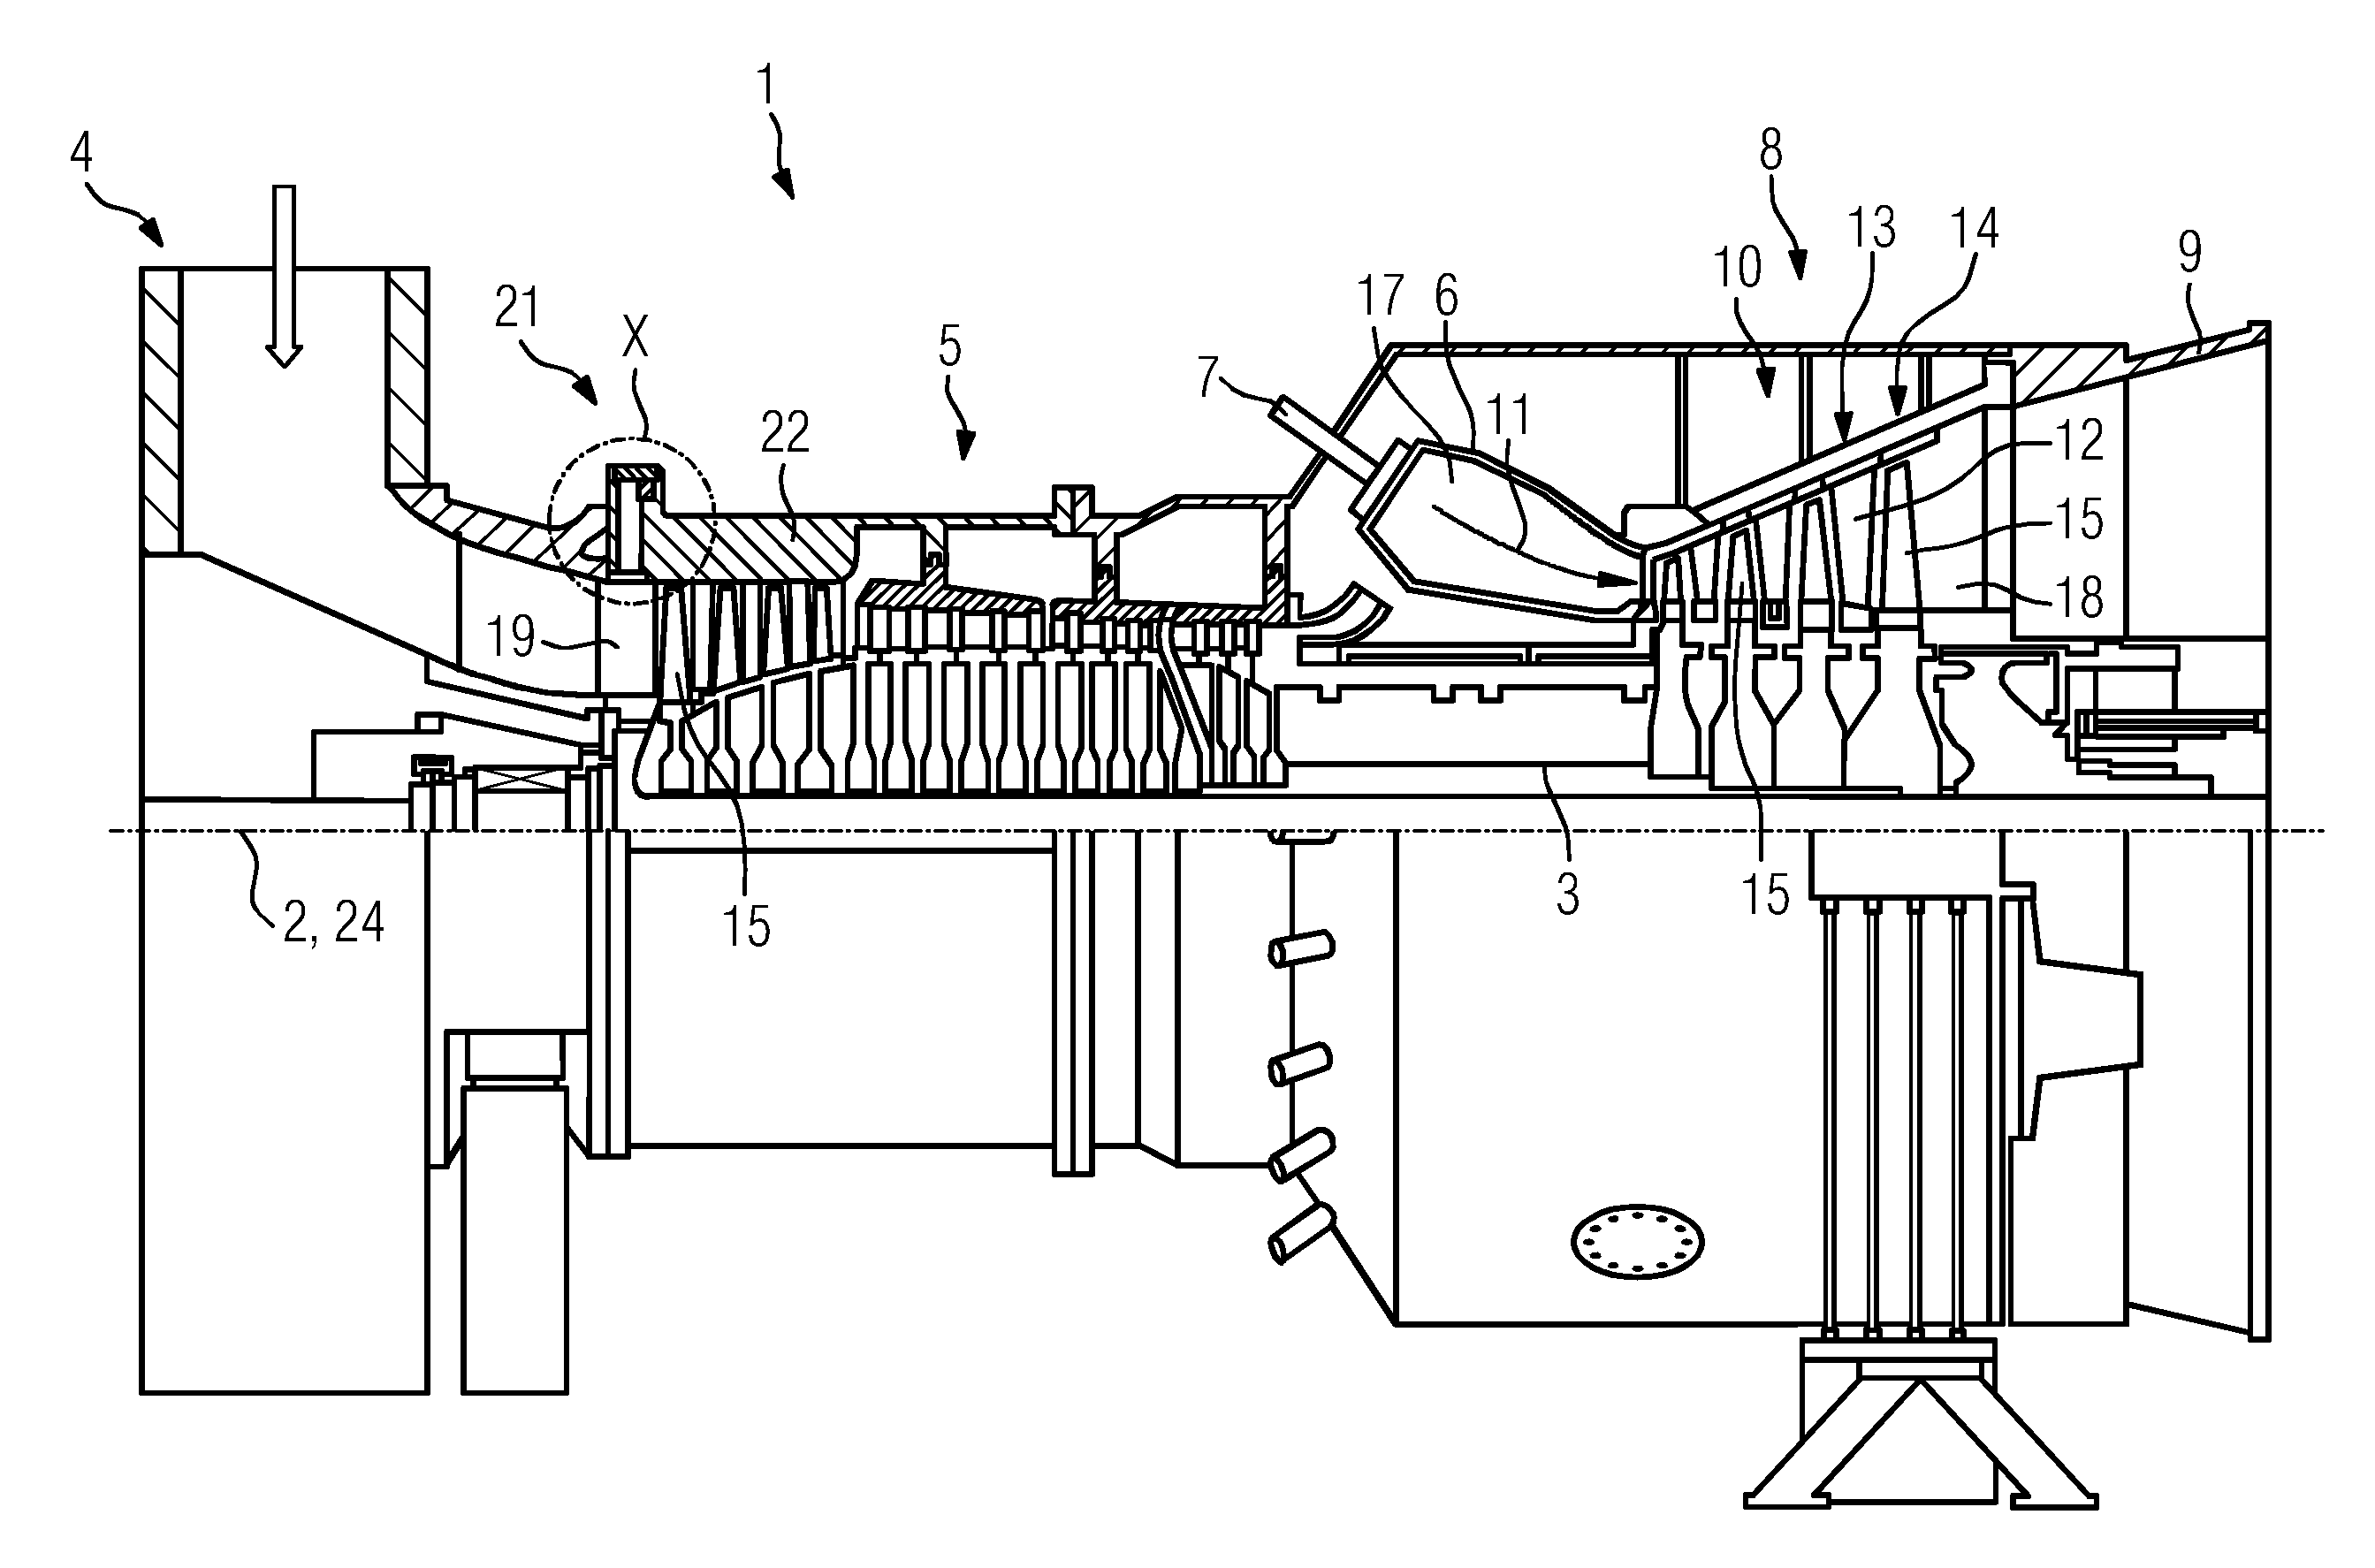 Drive device for pivoting adjustable blades of a turbomachine